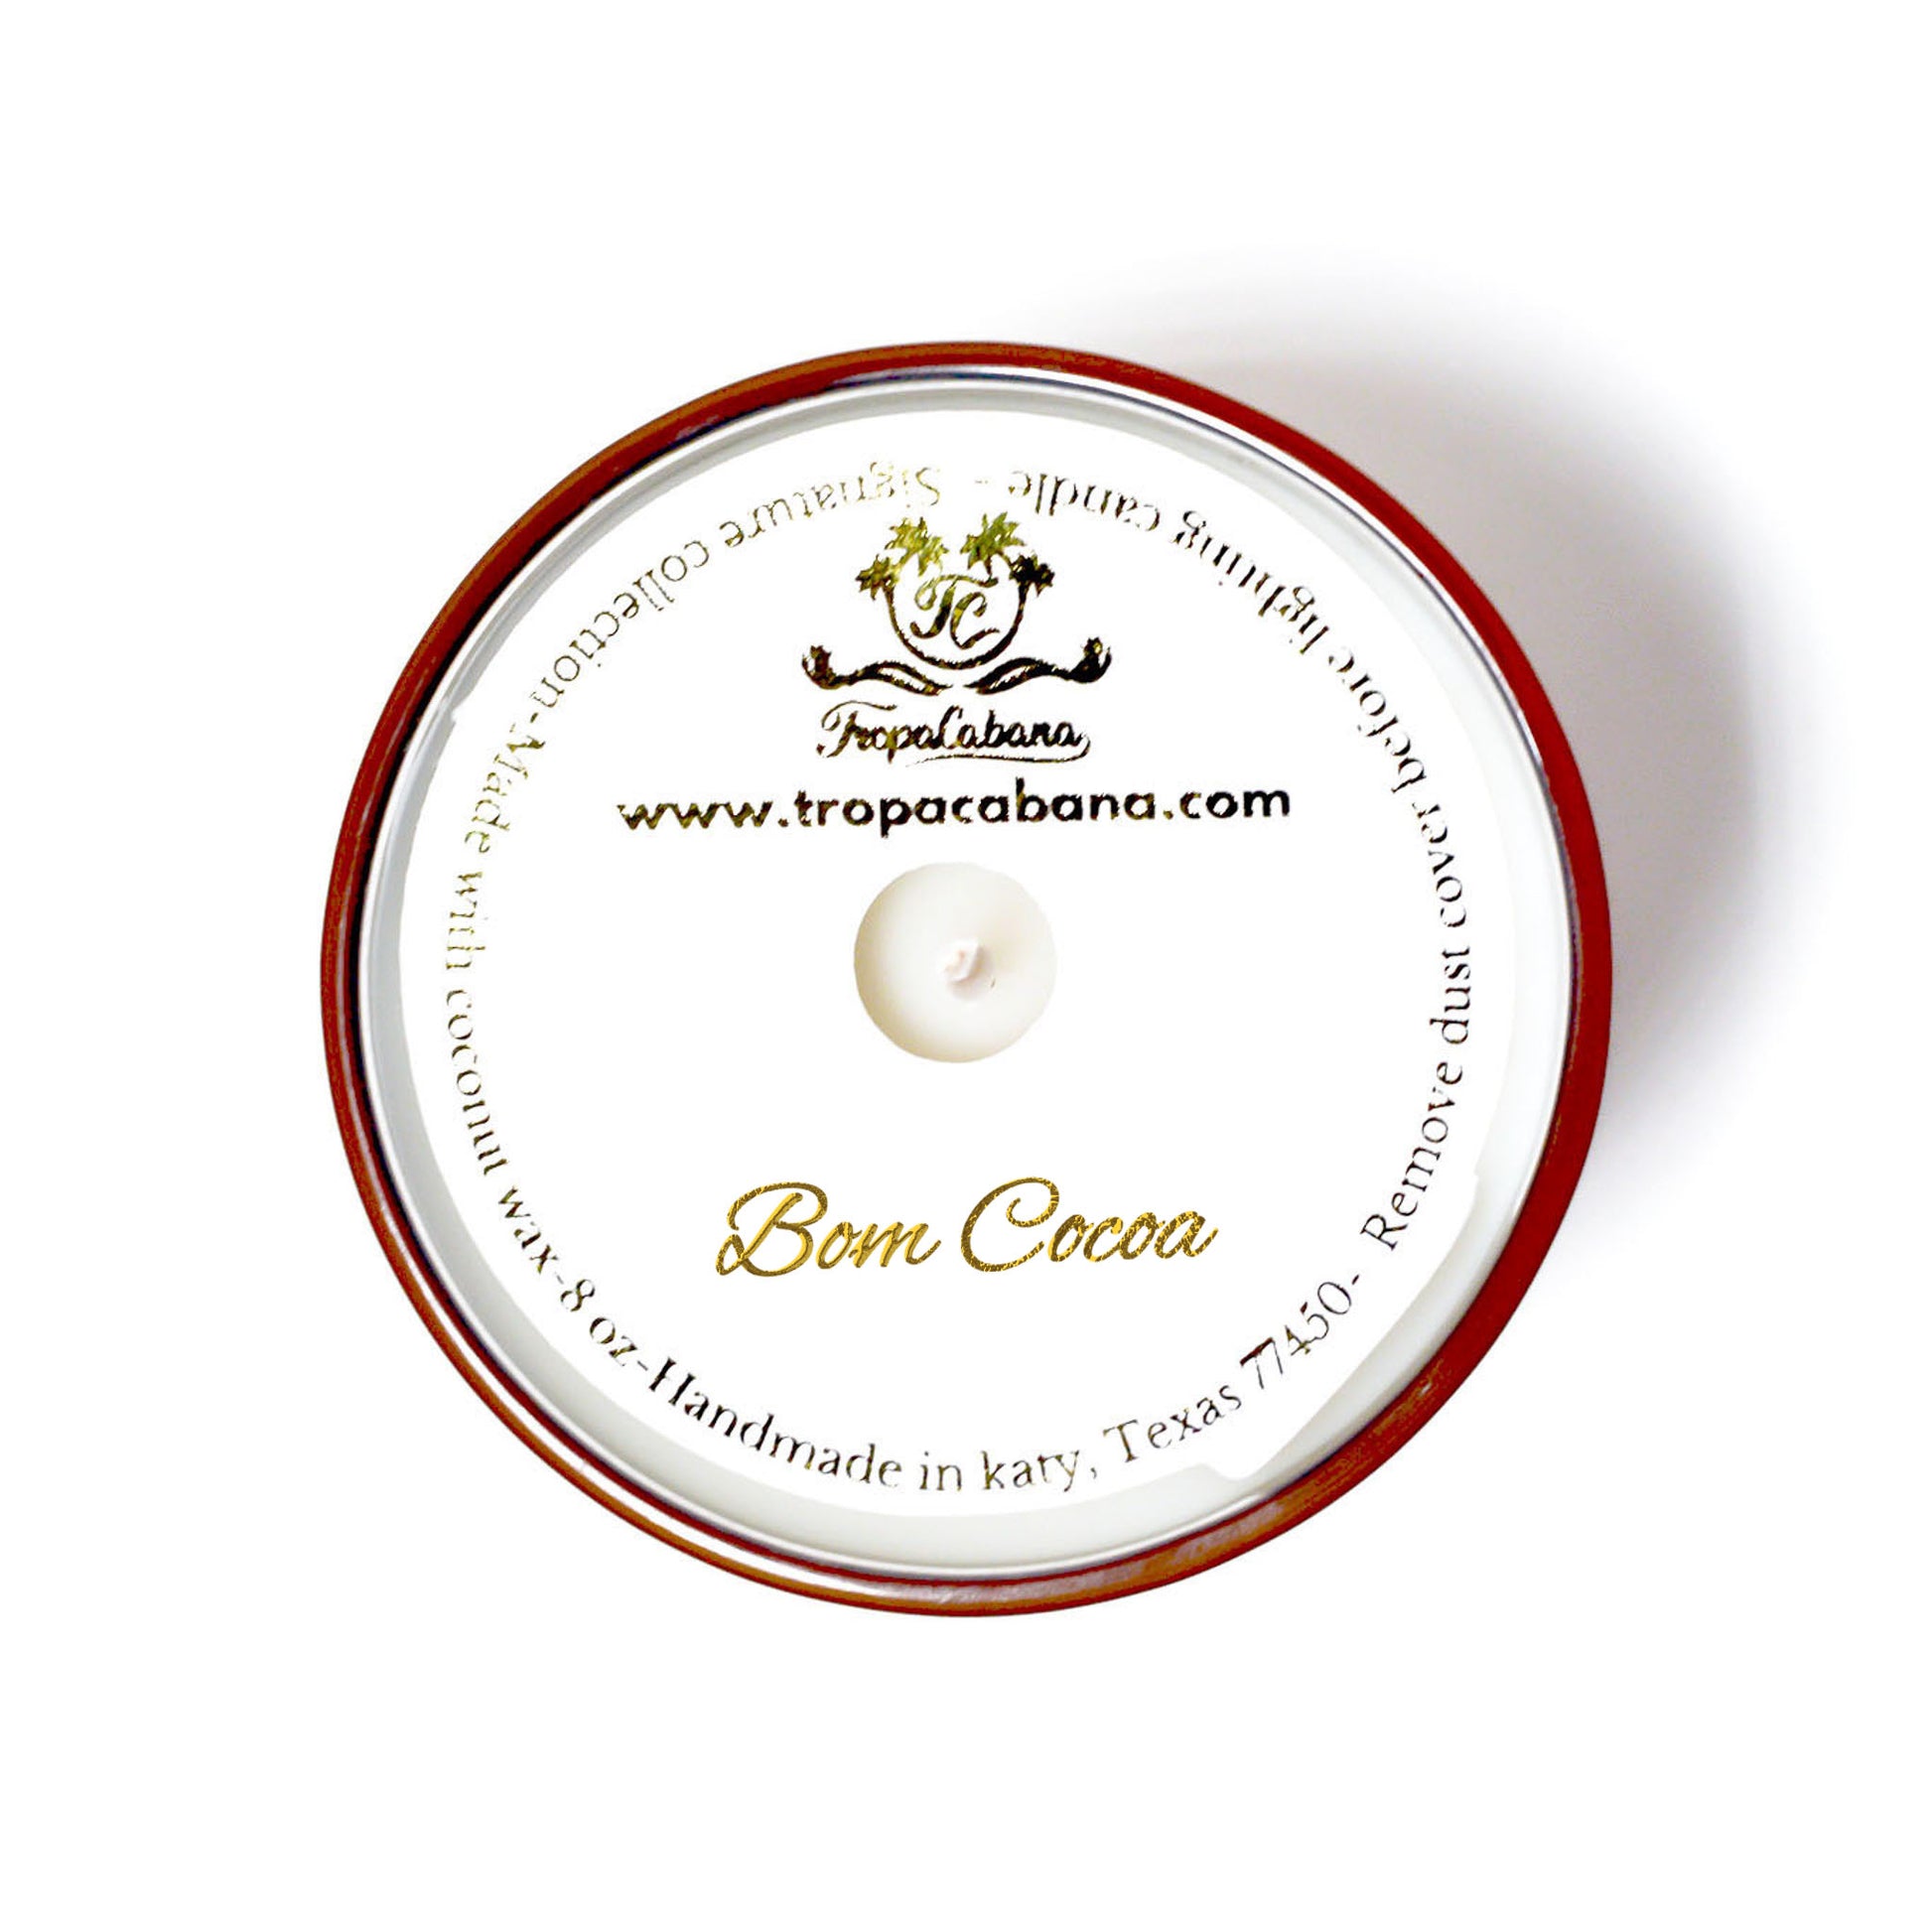 8 oz Bom Cocoa Candles, Signature Collection, Sweet Fragrance, Chocolate Fragrance, Unisex, Gifts for Him, Gifts for her, Gifts for travelers, Special Occasion Gift, Luxury Candle, Vegan Candle, Coconut Wax Candle, Scented Candle, Aromatherapy, Cacao, cinnamon and sweet caramel, TropaCabana, Gold Glass Jar Candle, Made in the US, Vet Owned Business, Woman Owned Business, Brazilian Owned Business, Small Business, Support Local, Support Small, Handmade, Handpoured Candles.